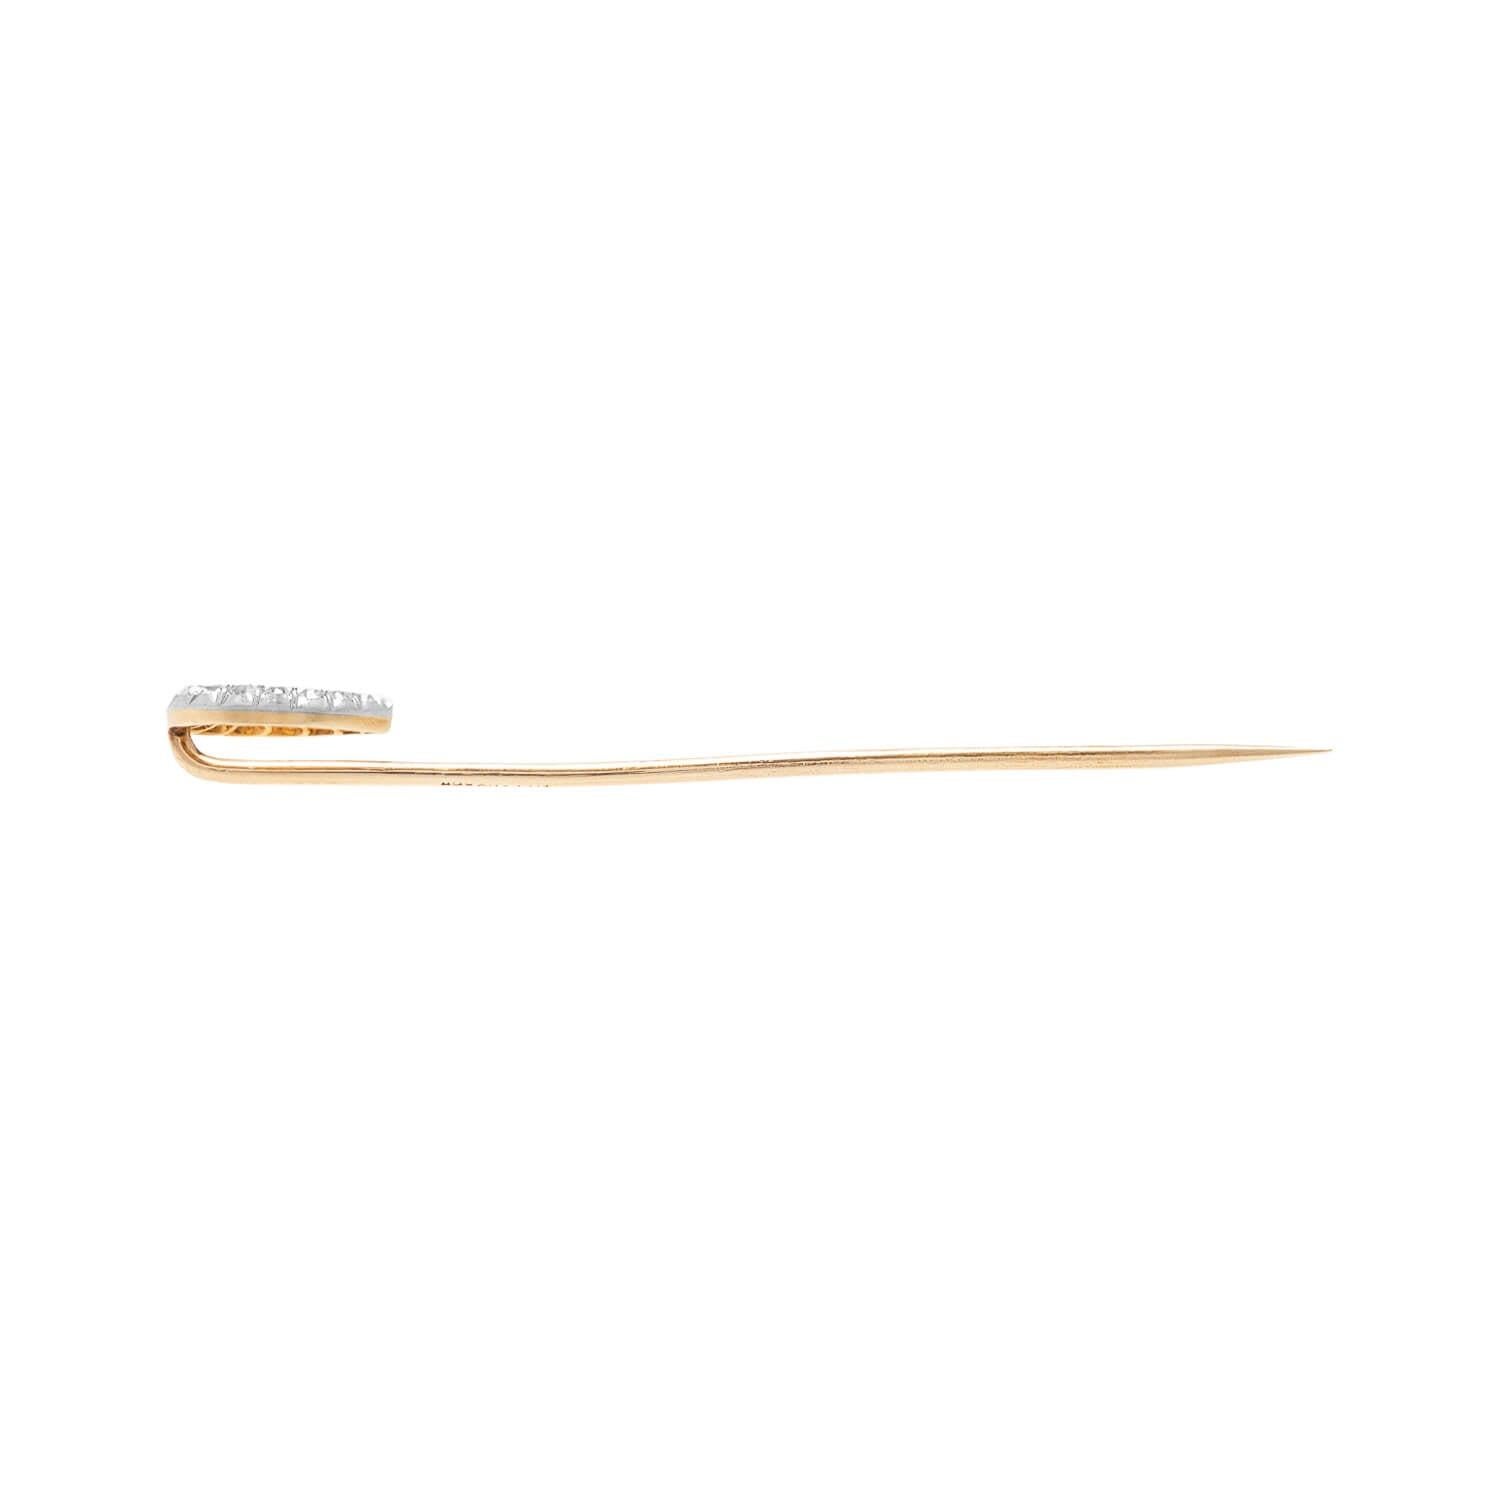 A beautiful vintage TIFFANY & CO horseshoe stick pin (ca1940)! The pin is crafted in 14kt yellow and white gold and features a delicate diamond horseshoe. The horseshoe holds 15 small graduated round cut diamonds. Attached to the back of the